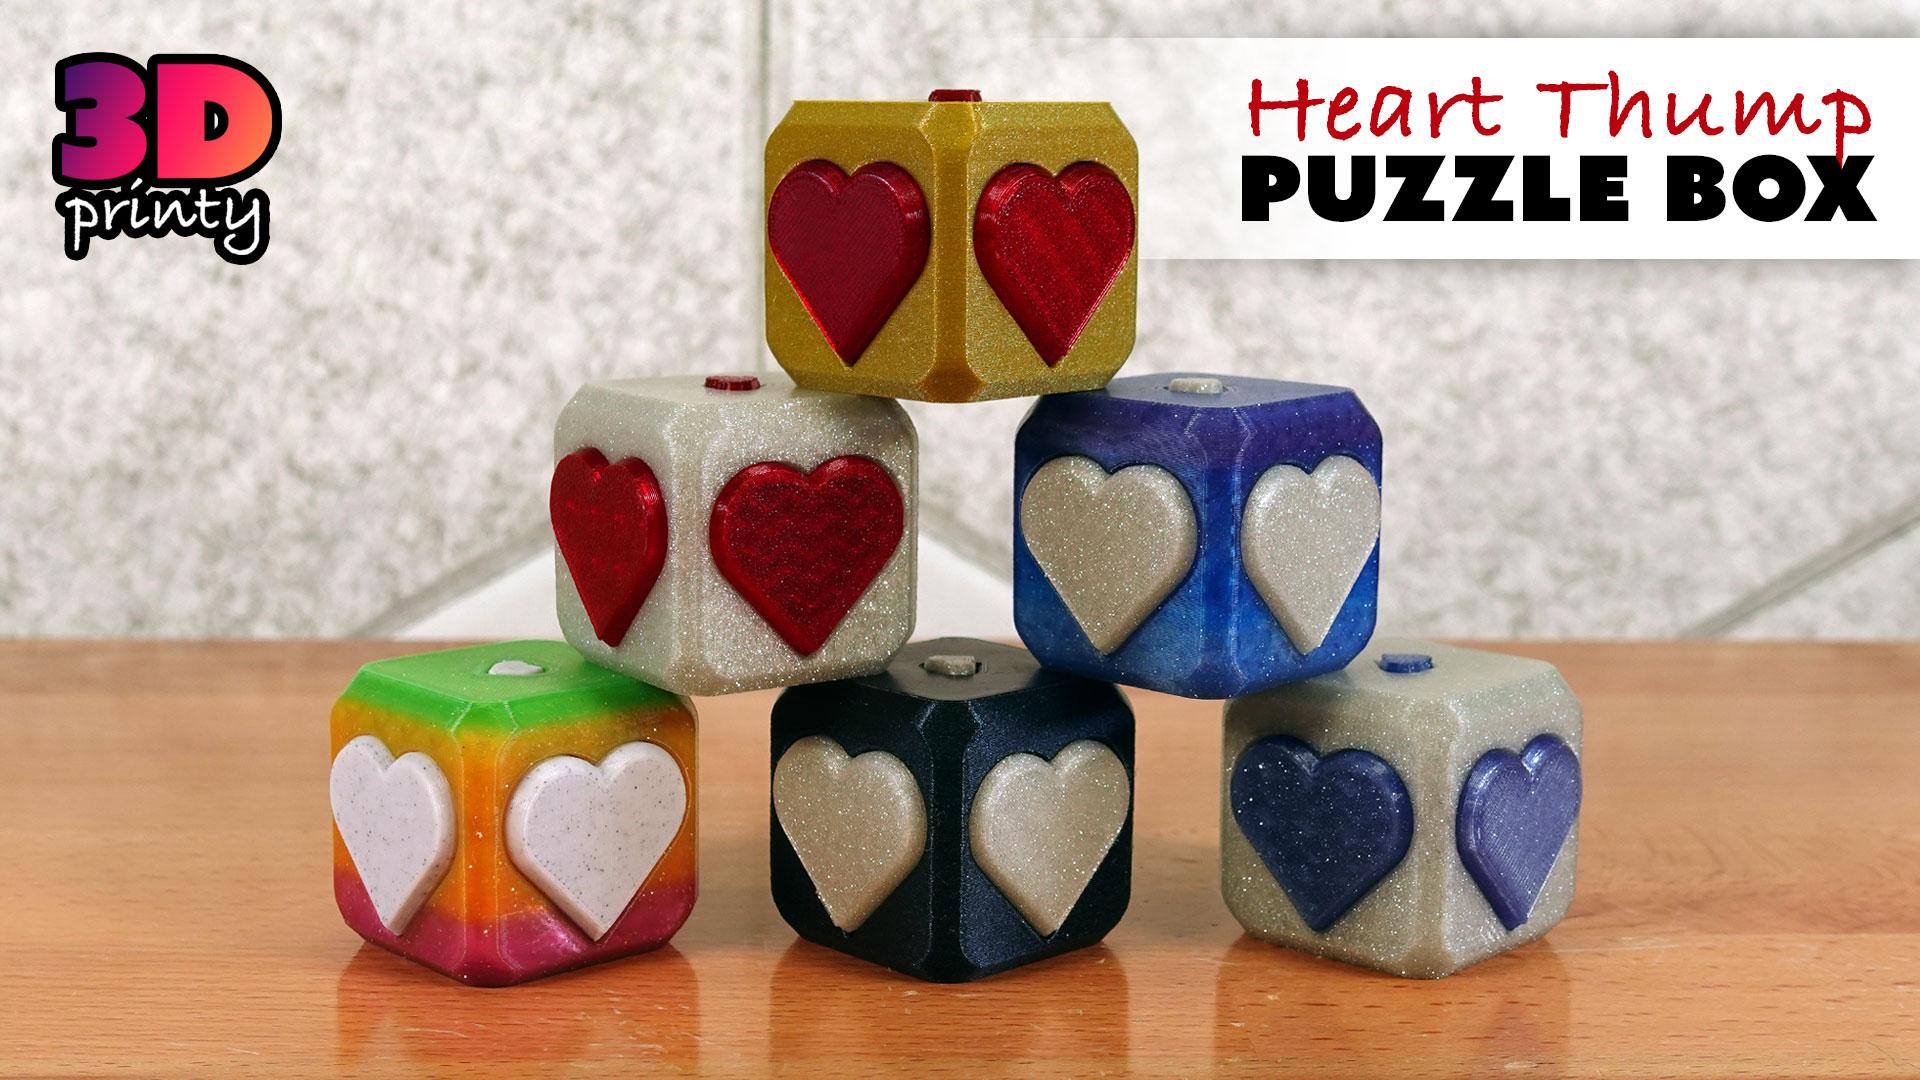 New 3D Printed Puzzle Box for Valentine's Day!